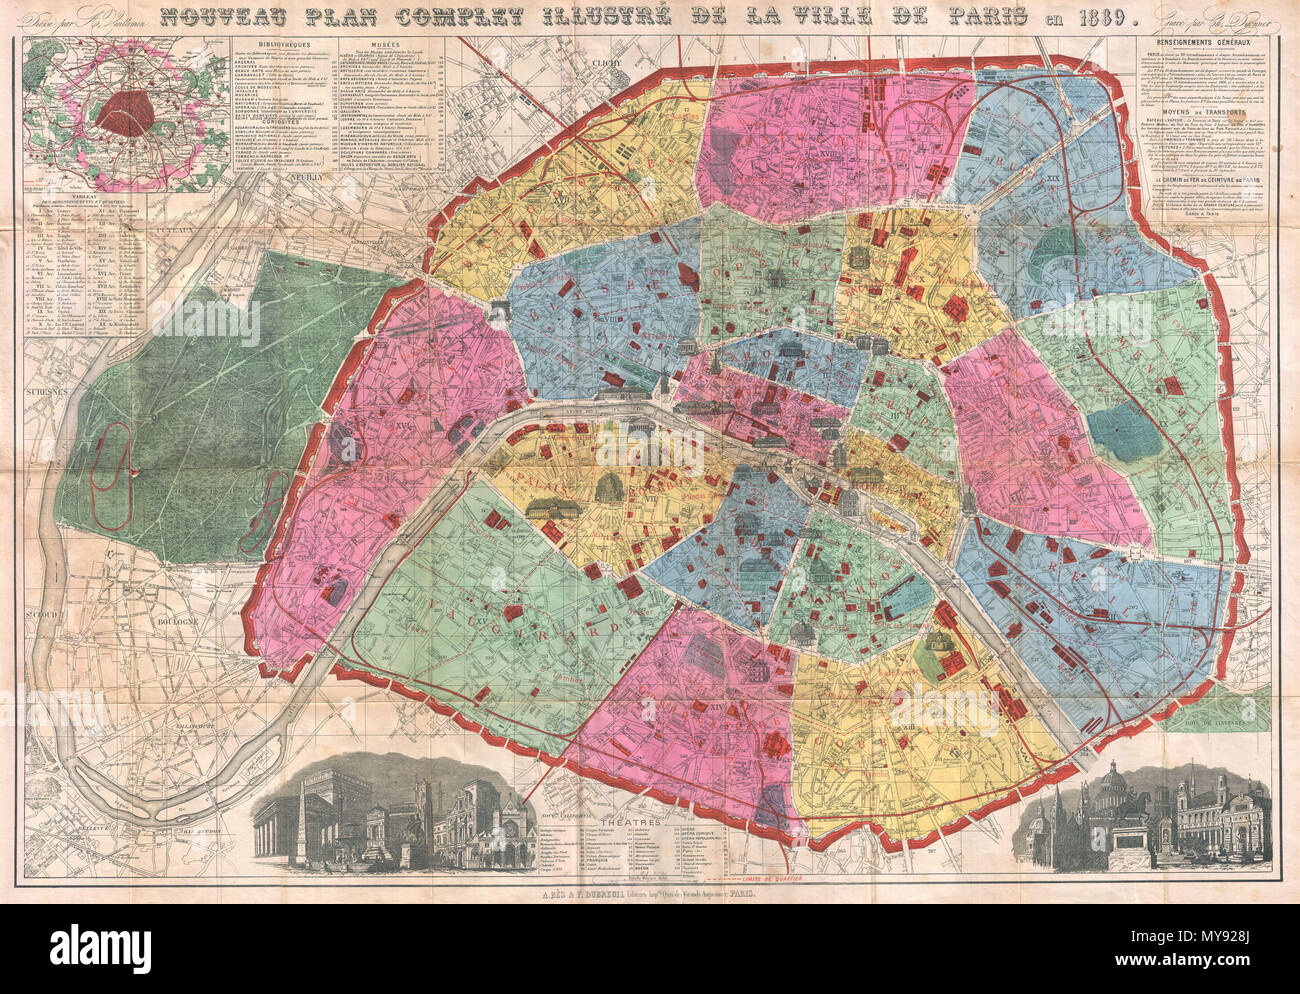 . Nouveau Plan Complet Illustre de la Ville de Paris en 1889.  English: A bright, colorful map of Paris made by A. Vuillemin for the 1889 Exposition Universelle (World's Fair). Depicts the walled center of Paris as well as its immediate vicinity to the west, including the Bois de Boulogne. Important buildings are noted throughout and often shown in profile. The park where the 1880 Exposition Universelle was held, named the Champ de Mars, is noted. At the western end of the Champ de Mars, the Eiffel Tower is also noted as Tour Eiffel 300 Meters. It is actually 324 meters. The Eiffel Tower was b Stock Photo